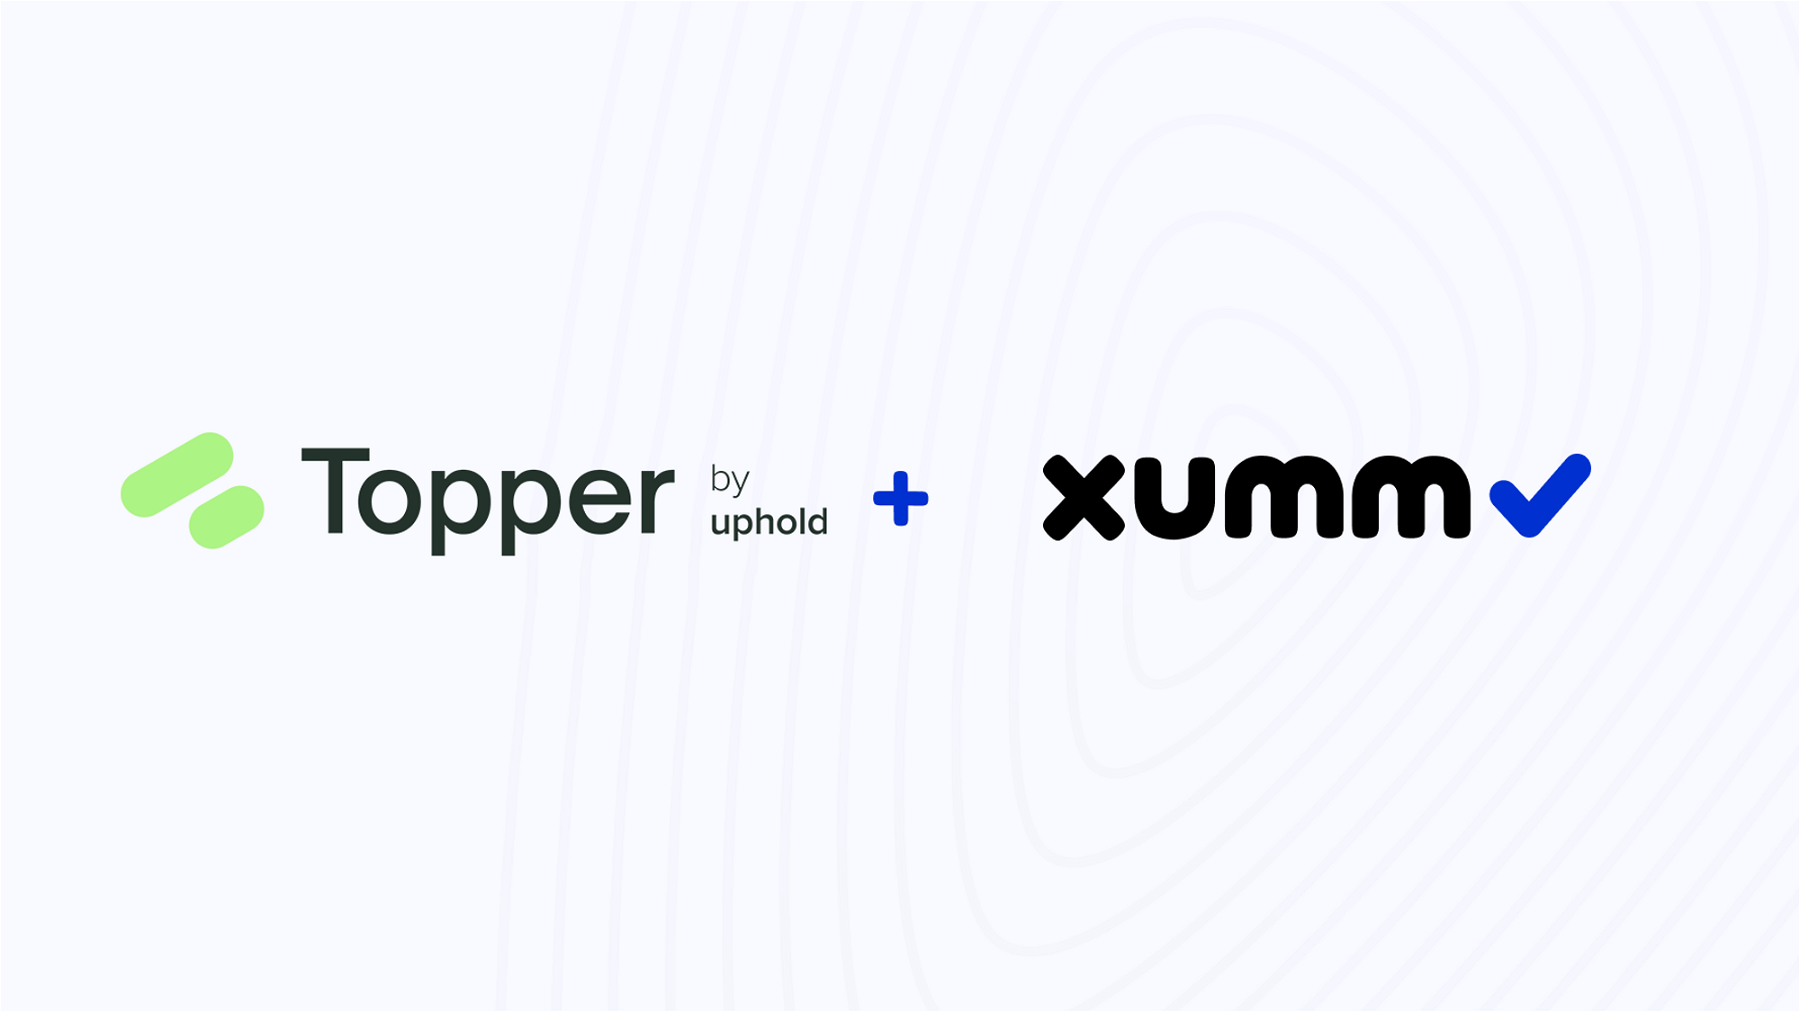 Xumm Adds Topper by Uphold, Offering a Smooth On-Ramping Solution